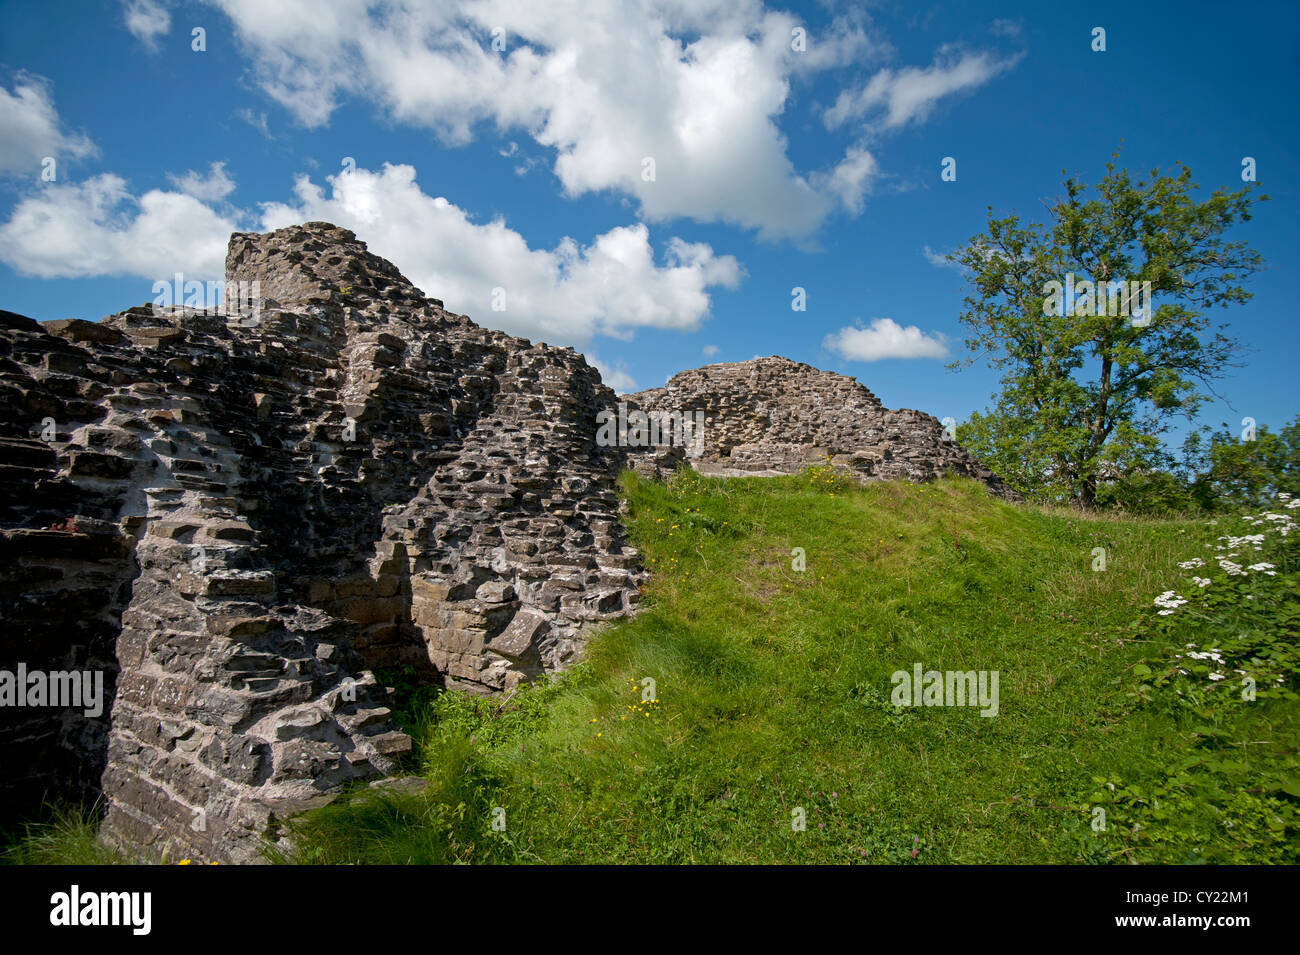 Dolforwyn Castle, recently excavated ruins in Powys, Montgomeryshire. Mid Wales.  SCO 8708 Stock Photo